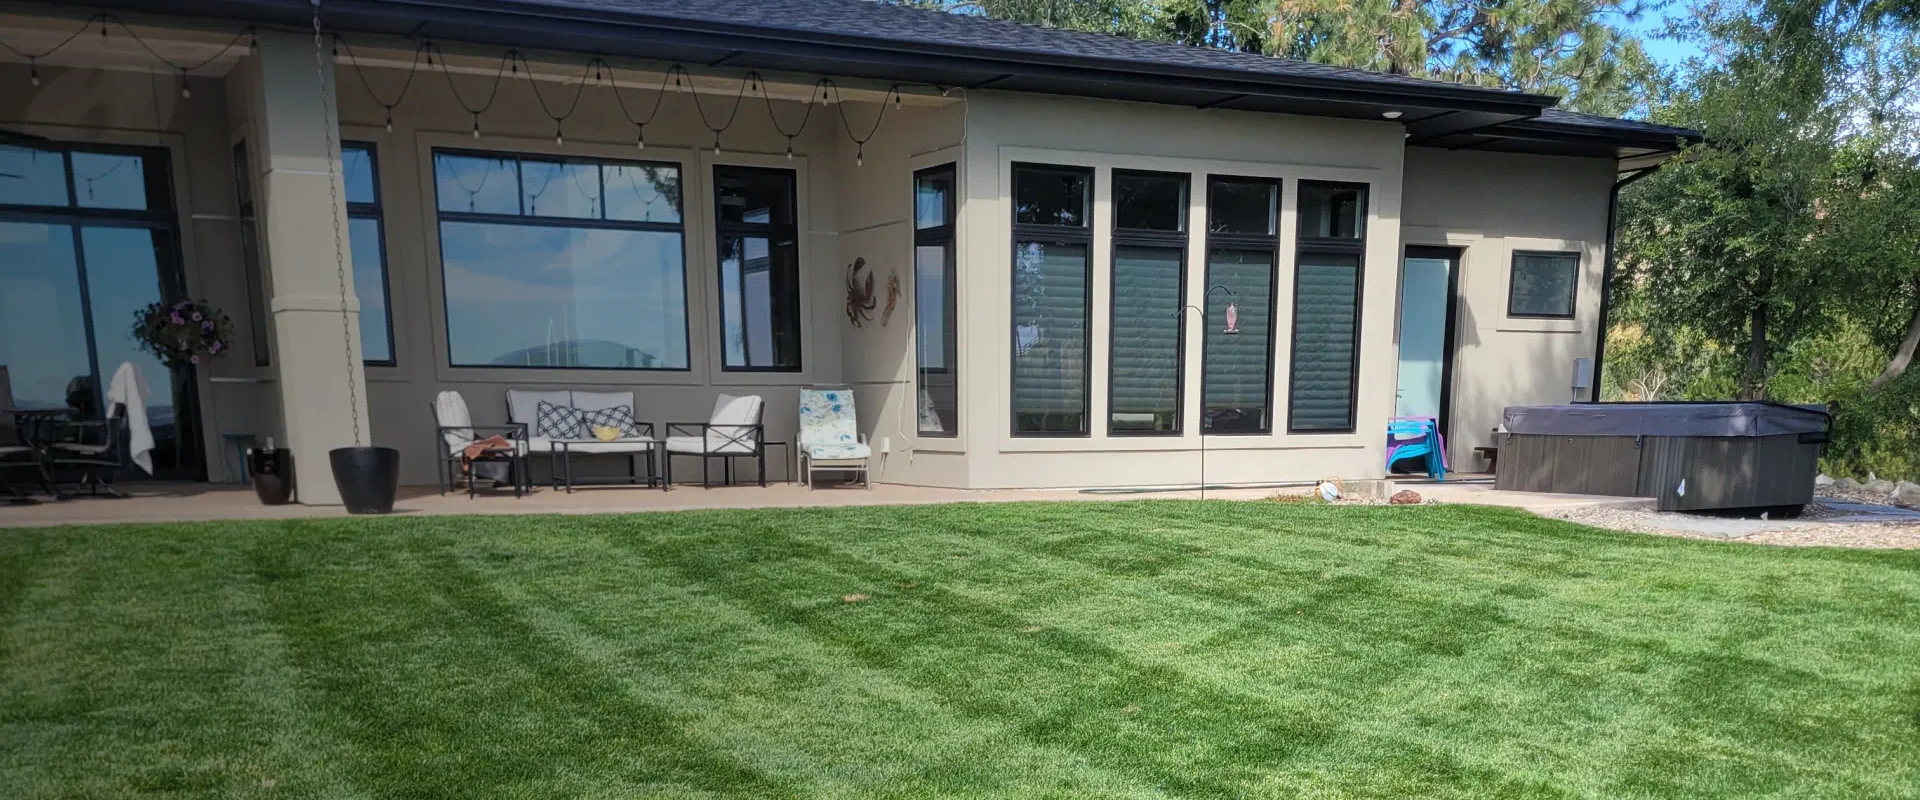 exterior view of a house with a beautiful lawn